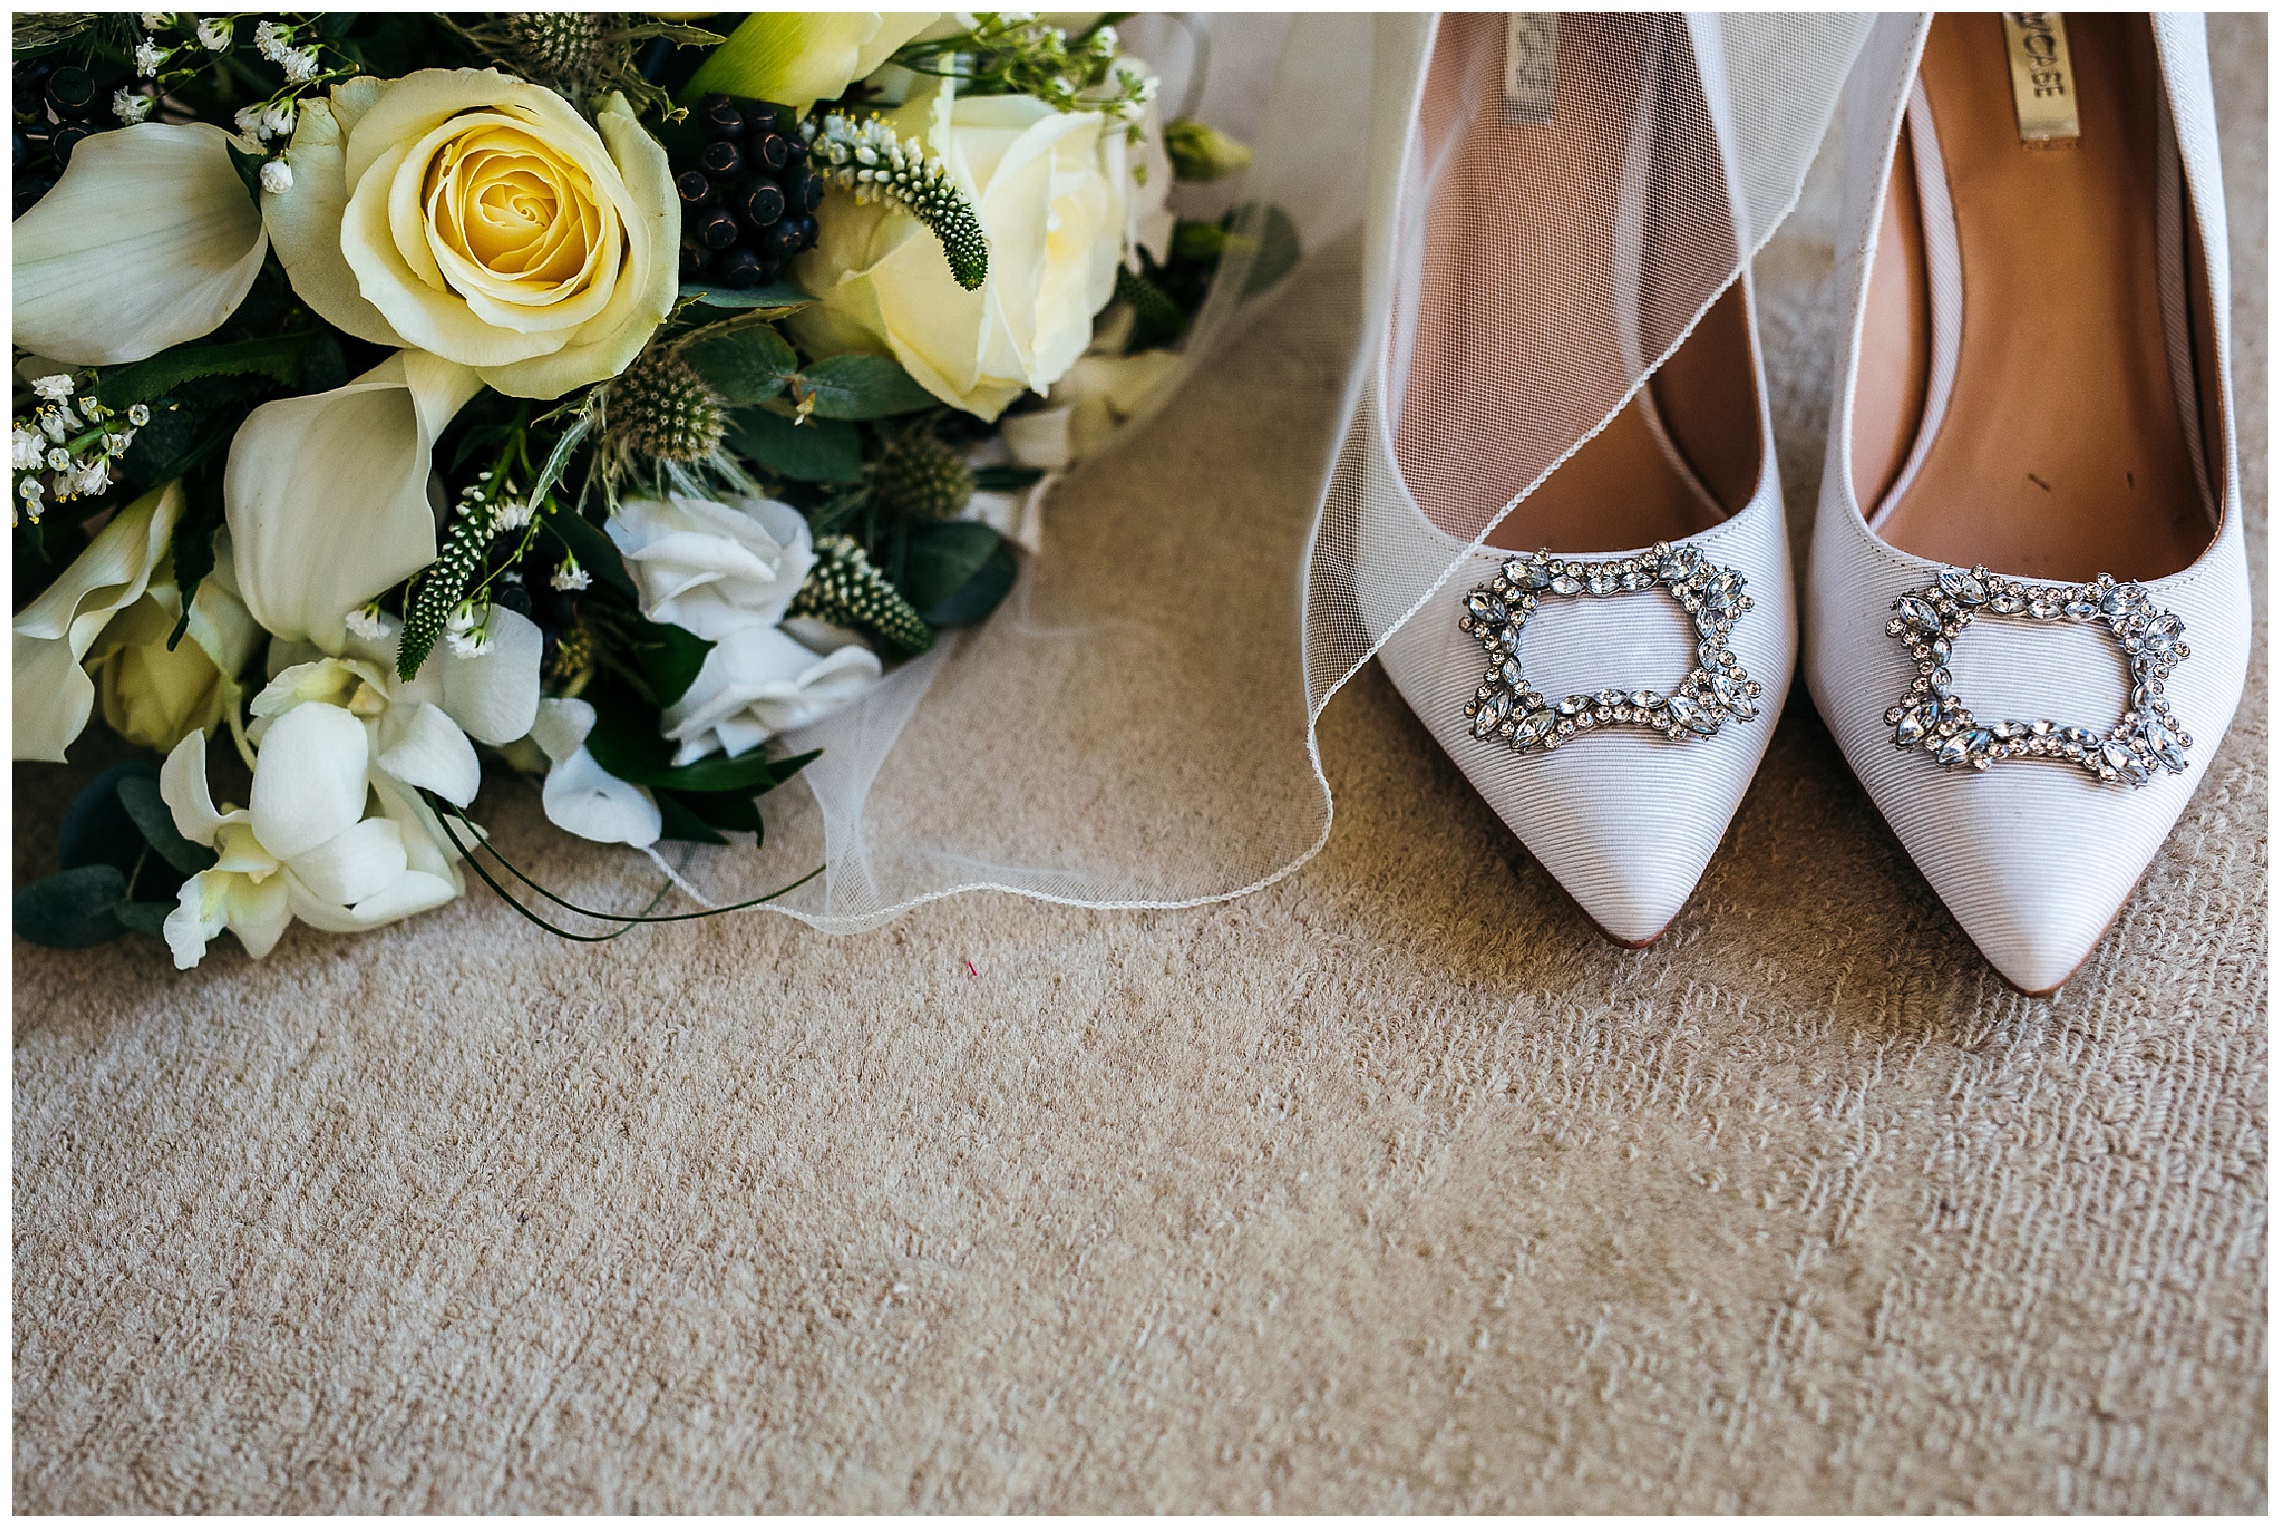 white wedding shoes with thin veil over them and white roses